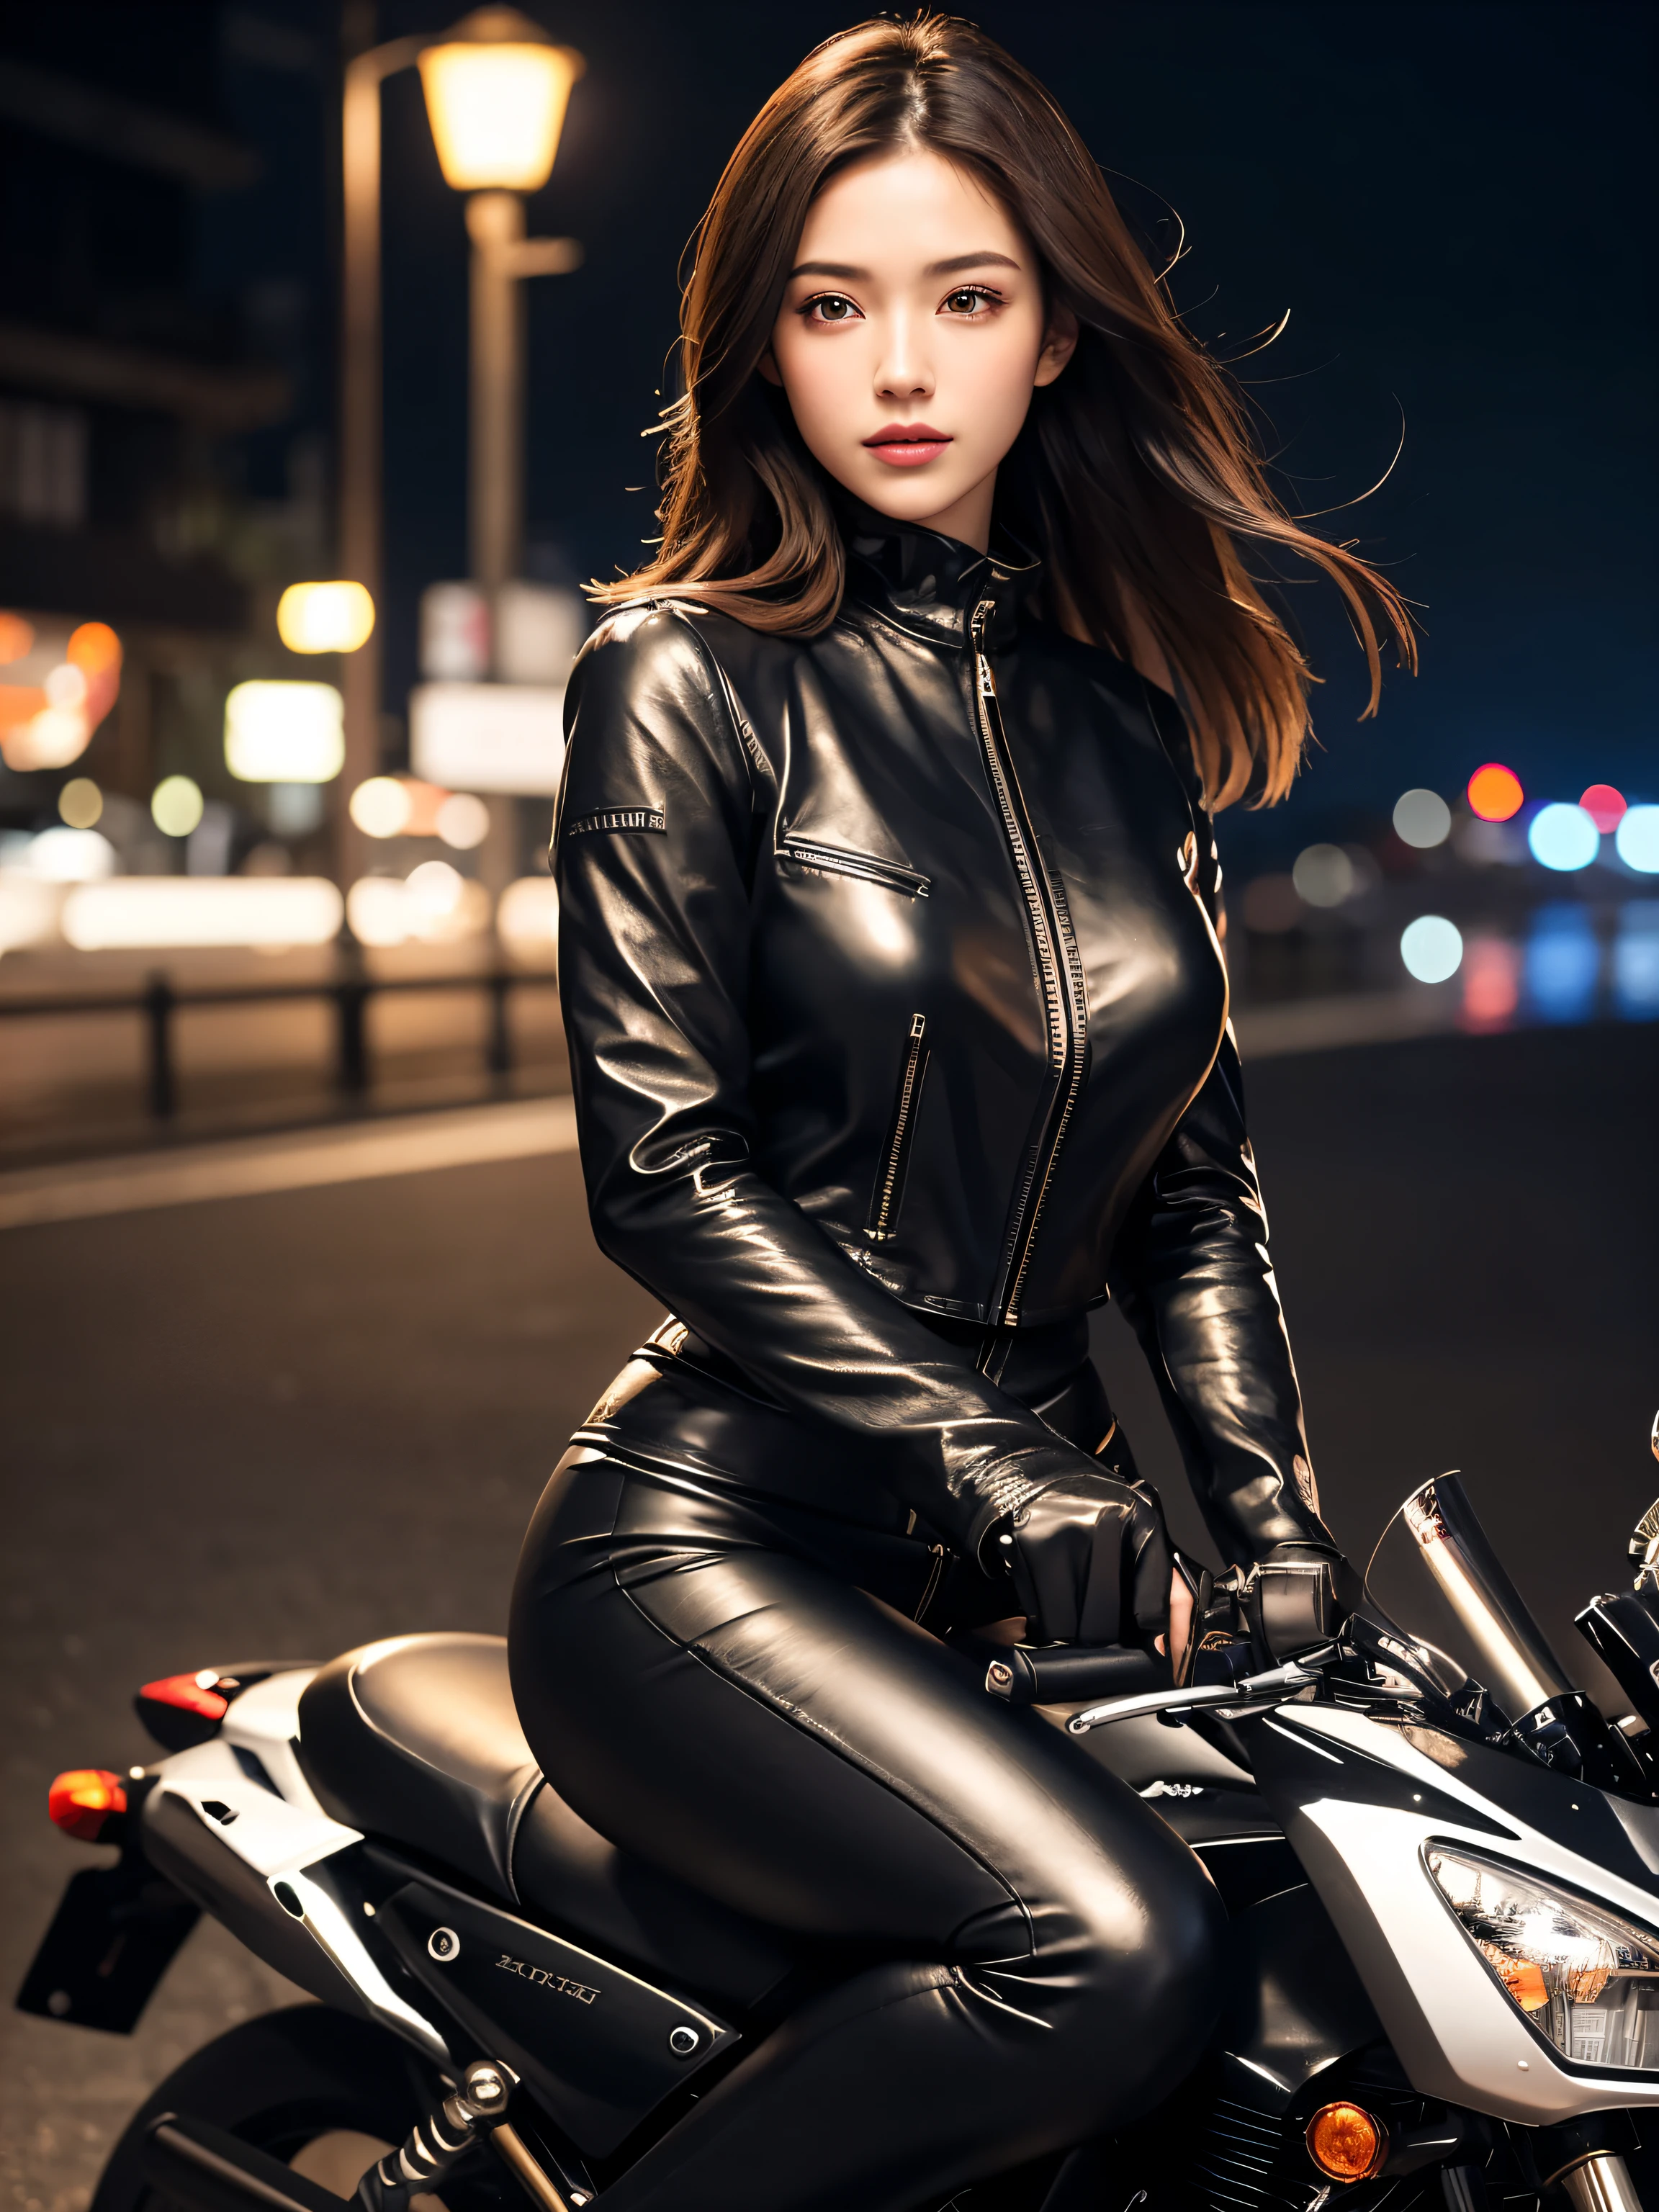 (Masute Piece), full-body-shot, Photos of all motorcycles, Cute young women in Japan, Ride an antique metallic silver motorcycle at the jetty, Charming shape, Shoulder length: light brown hair, shiny, Wear a black leather jacket., Glossy satin red bikini under riding jacket, Black leather gloves, Black leather pants, Black high heels boot, Gaze at the night view over the sea, Absolutely beautiful face., double eyelid, natural make up, long eyelashes, Glossy lips, 8k resolution, high-detail, detailed hairstyle, detailed face, Black eyes, Agents, Epic, Cinematic lighting, Octane Rendering, vibrant, Hyper-Realistic, Fair-skinned, Perfect limbs, perfect anatomy